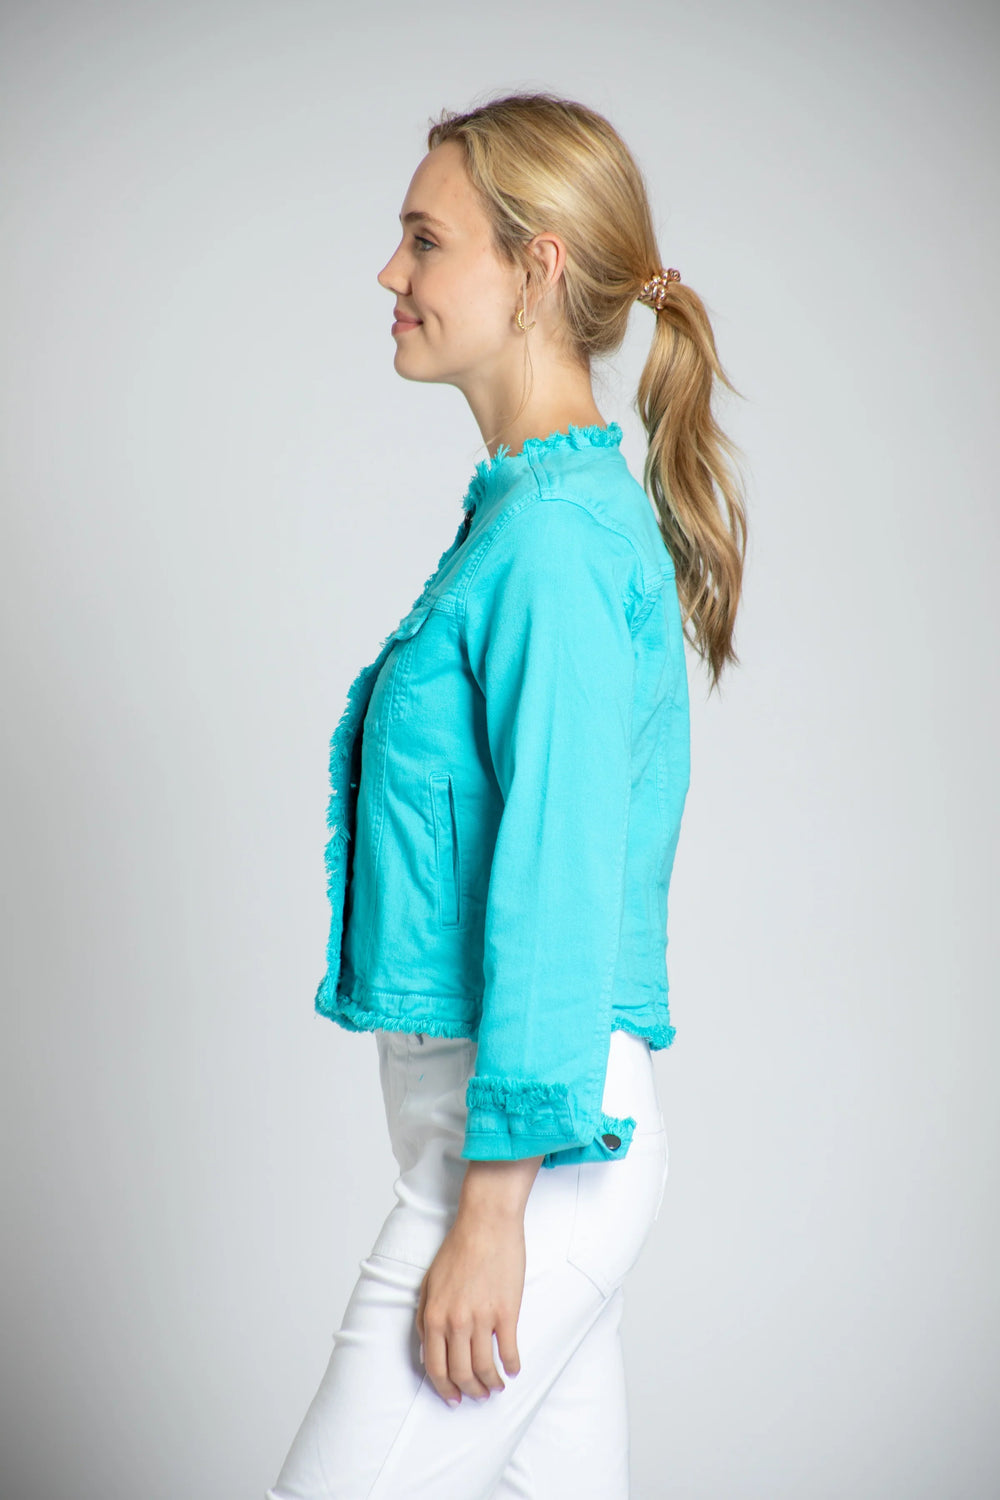 APNY Collarless Jean Jacket with Frayed Detail in Turquoise